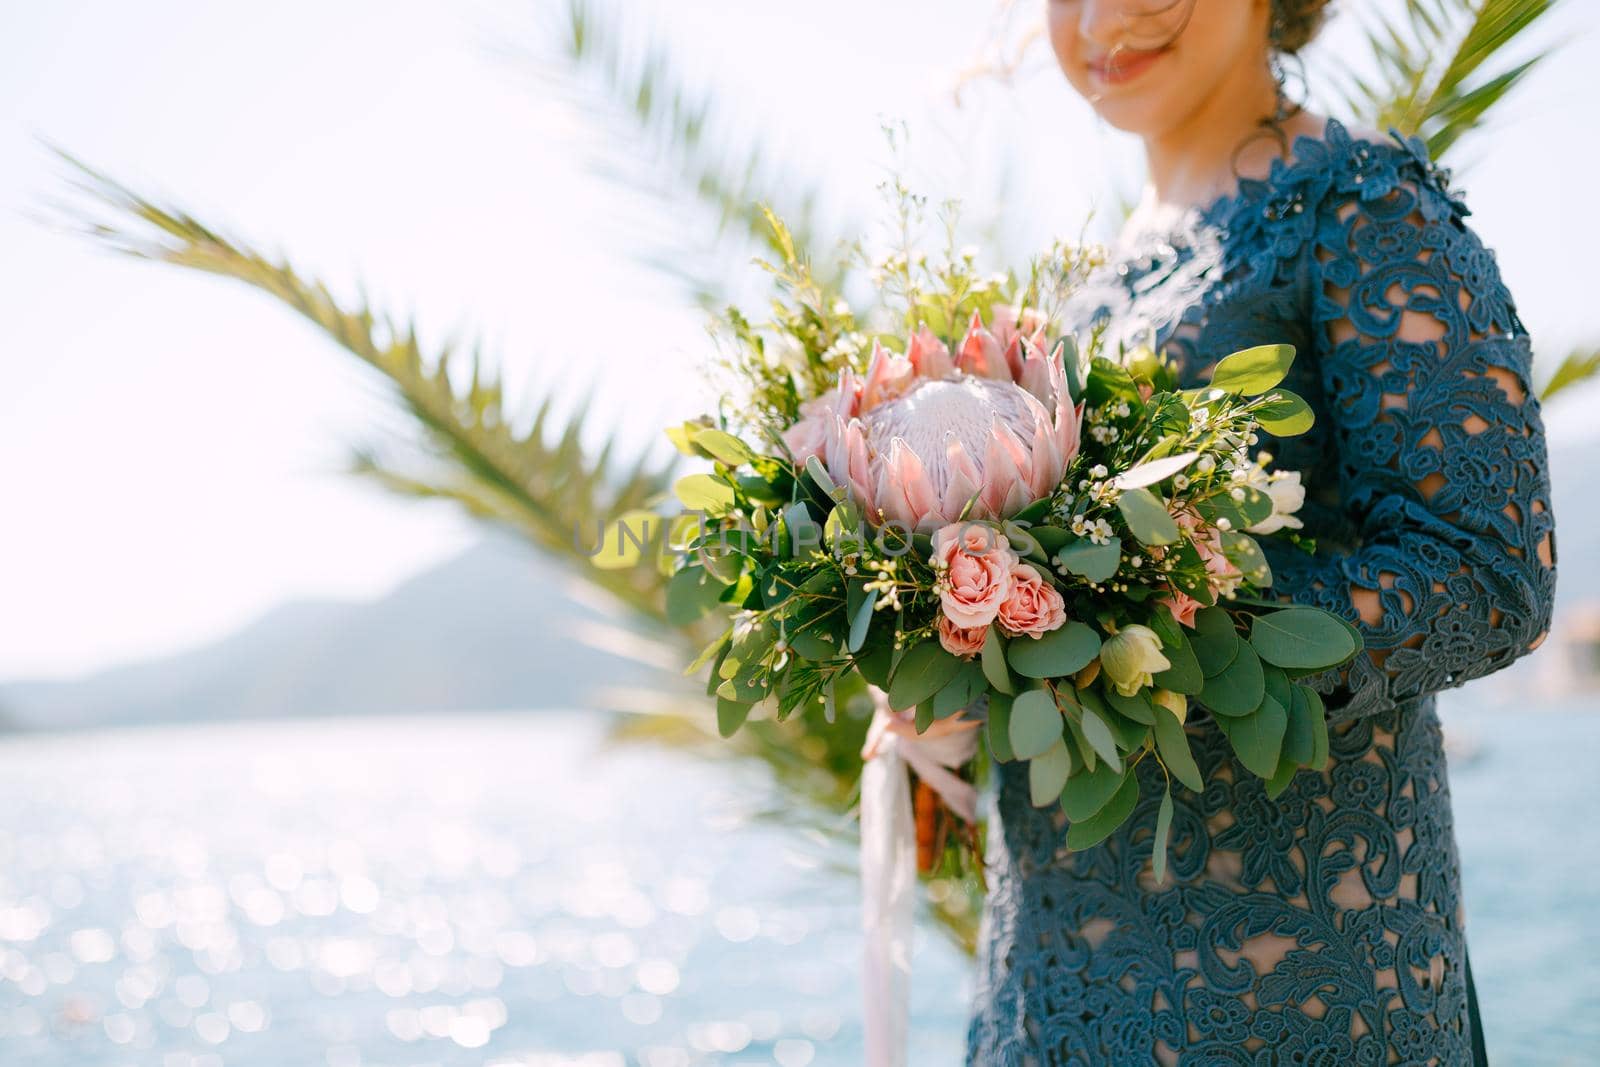 The bride in a stylish gray dress stands with wedding bouquets on the seashore, close-up. High quality photo